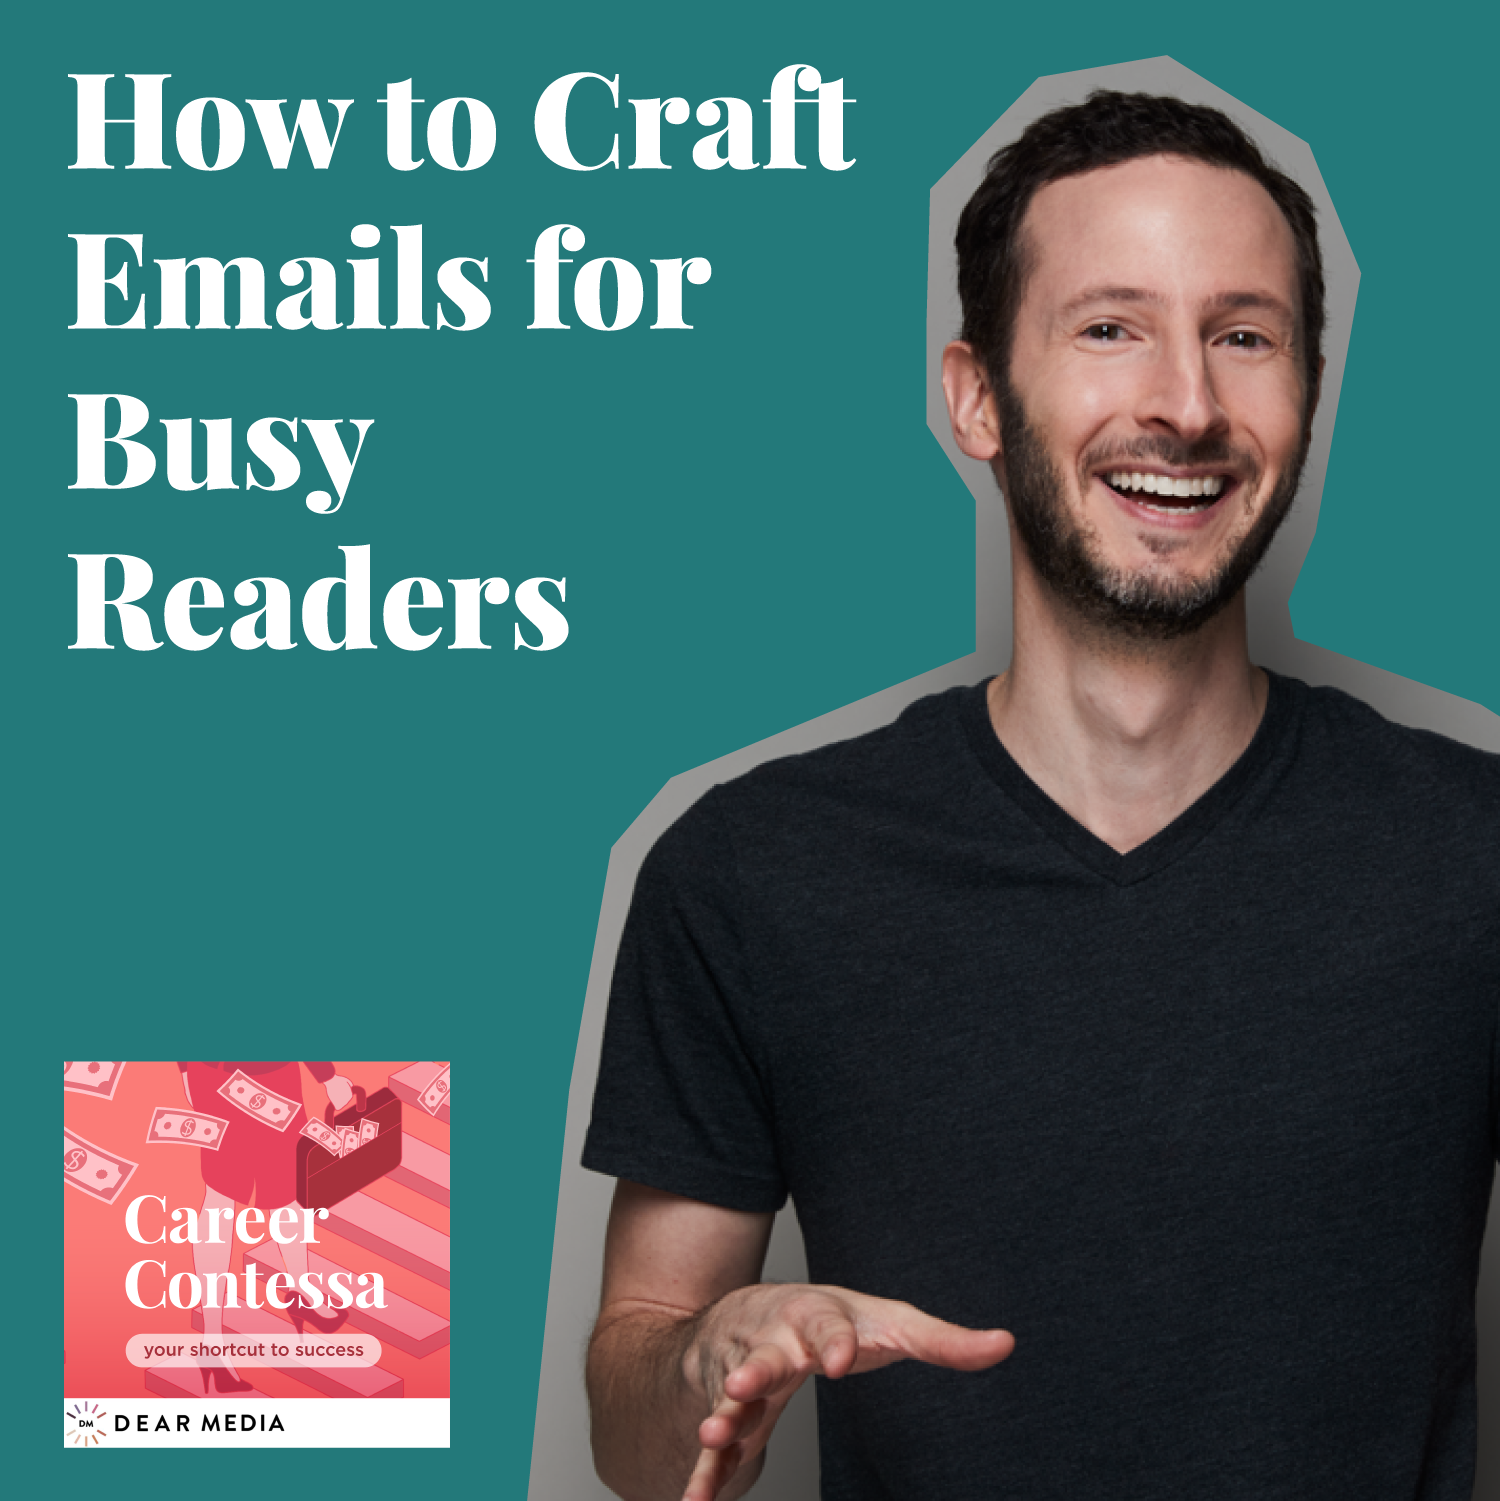 How to Craft Emails for Busy Readers Image